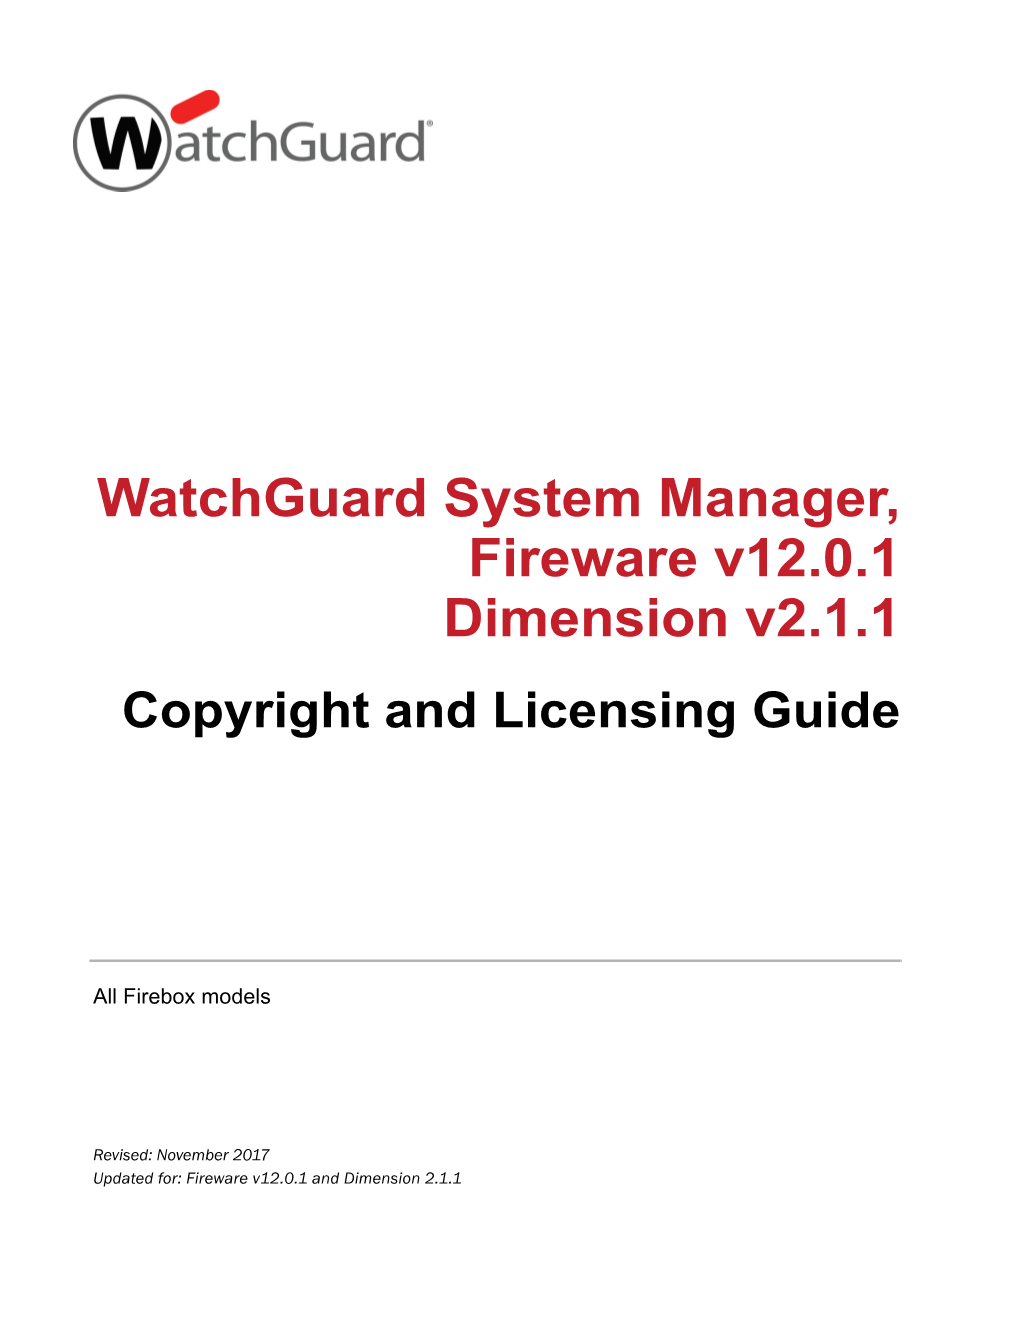 Copyright and Licensing Guide V12.0.1